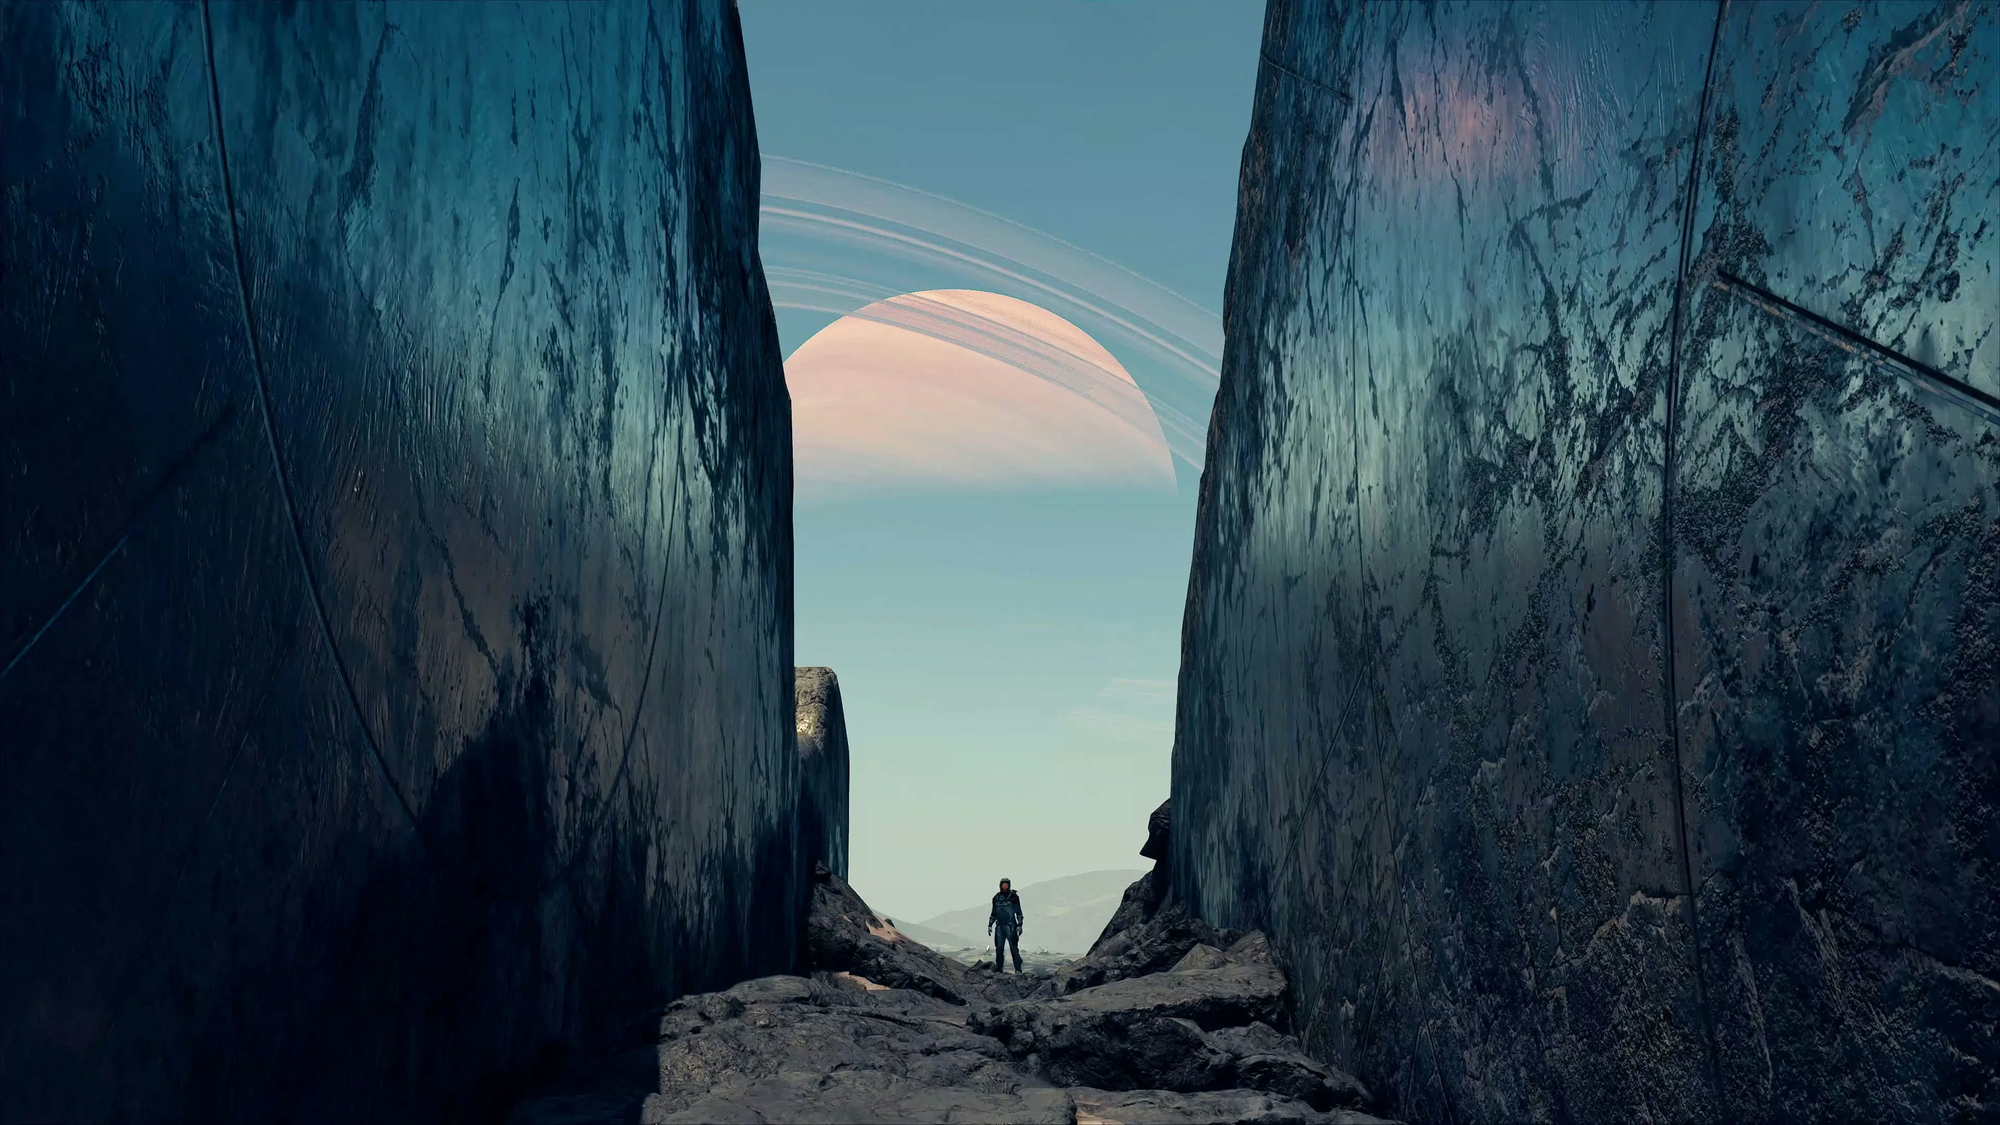 A spce explorer looking at an orbiting planet while stood in a canyon